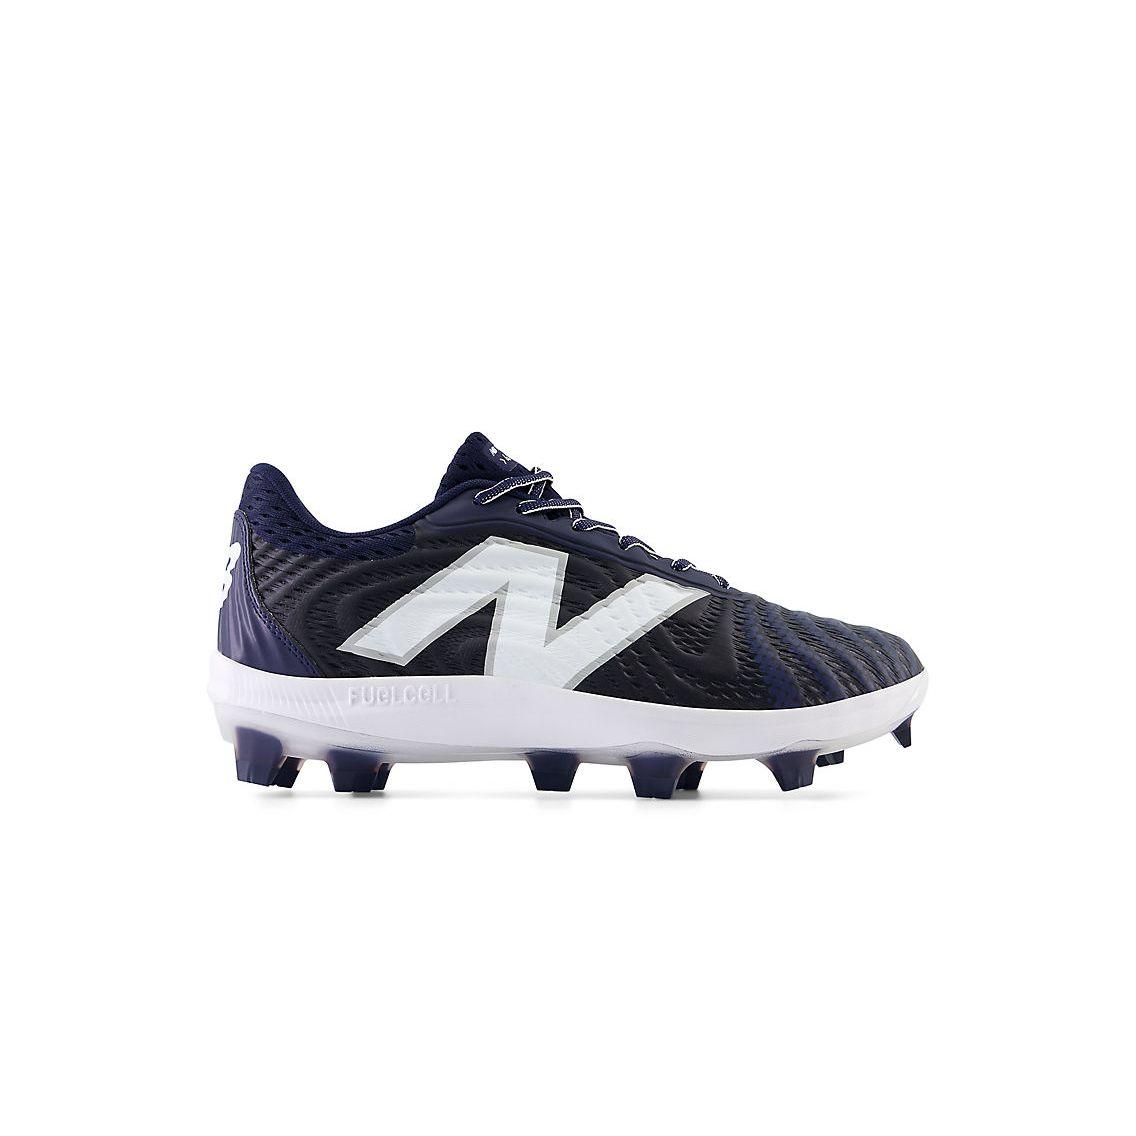 New Balance Men's FuelCell 4040 V7 Molded Baseball Cleats - Team Navy / Optic White - PL4040N7 - Smash It Sports